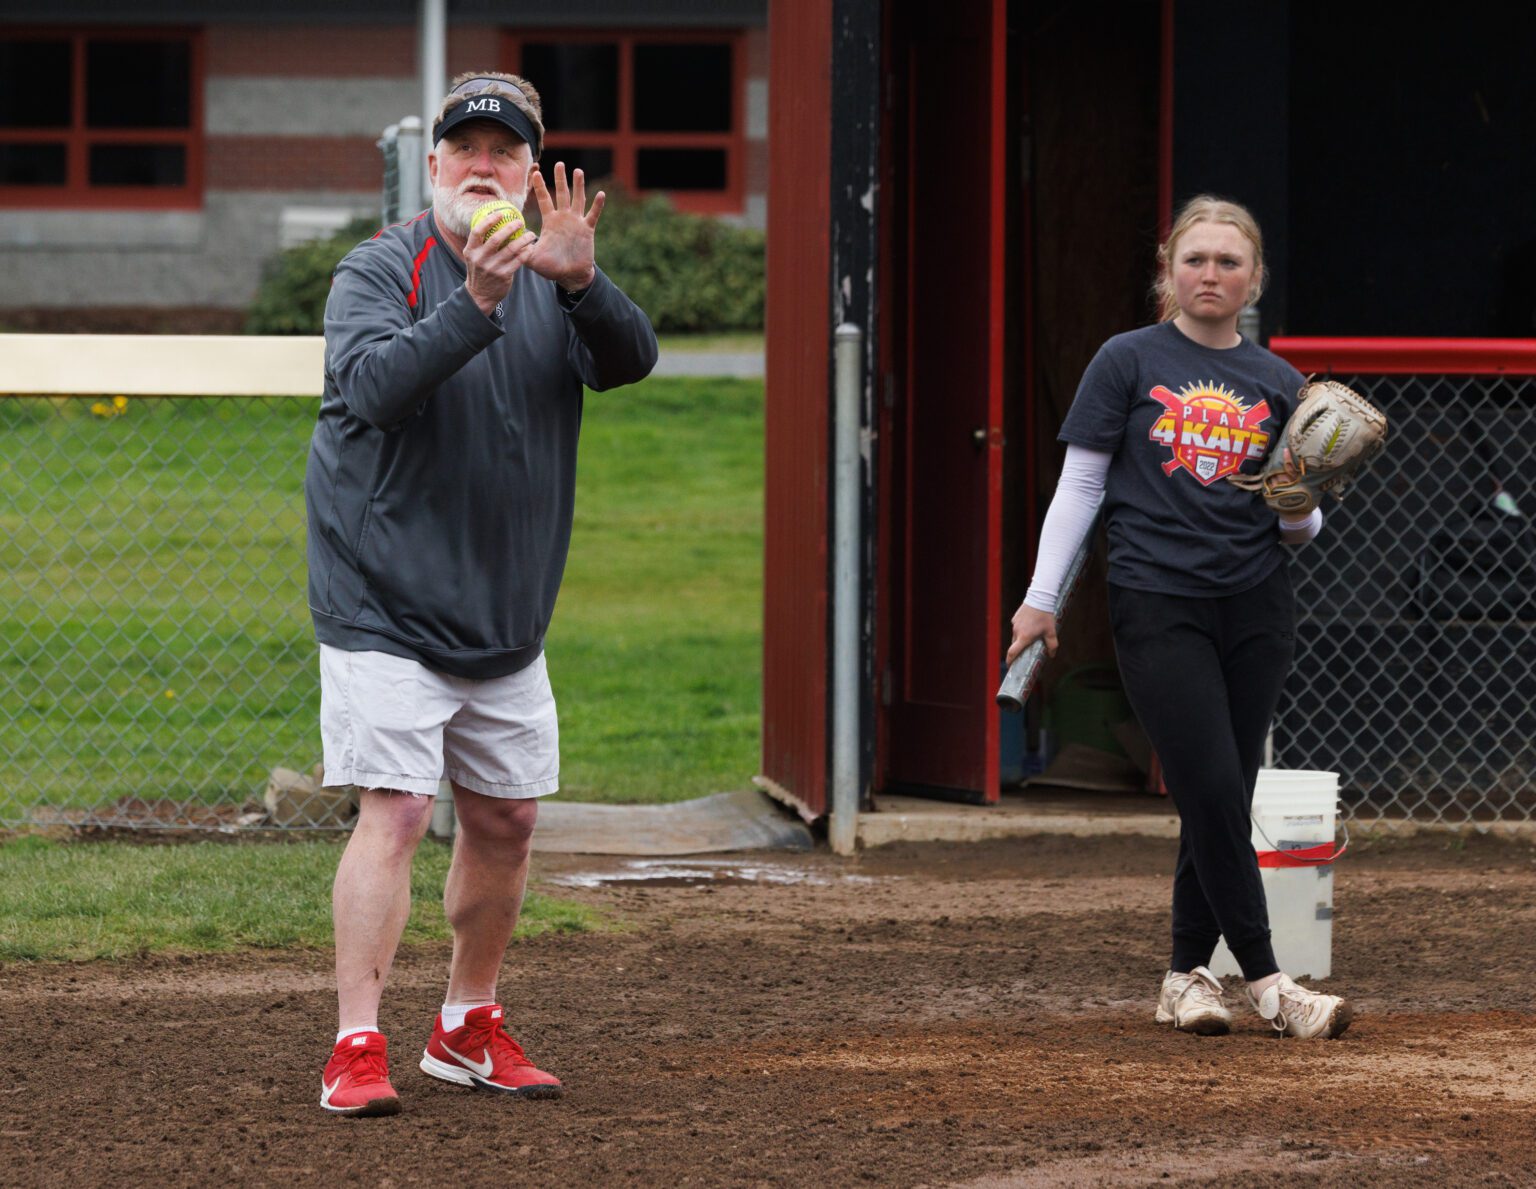 Mount Baker softball coach Ron Lepper demonstrates how to set up for the throw while catching the ball during practice.